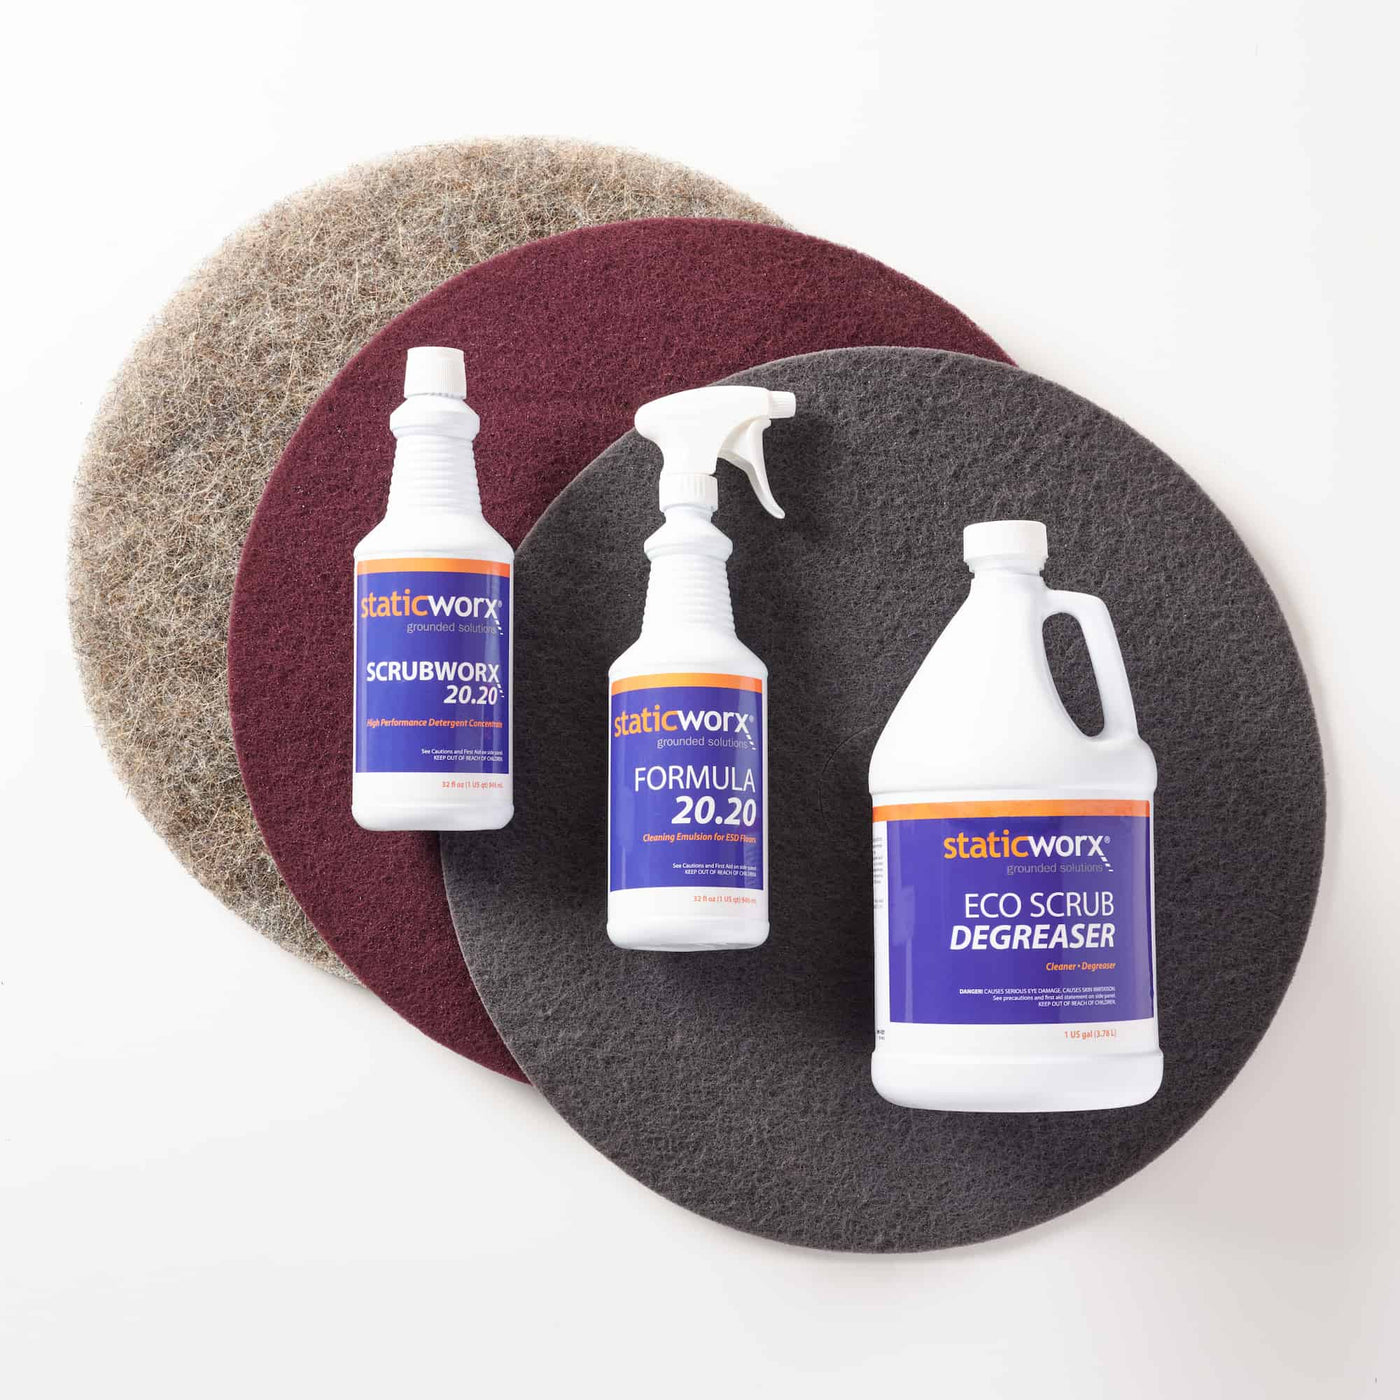 Photo of one of each scrubbing pad - grey, maroon and neutral, plus cleaning materials bottles: ScrubWorx 20.20, Formula 20.20 and EcoScrub degreaser